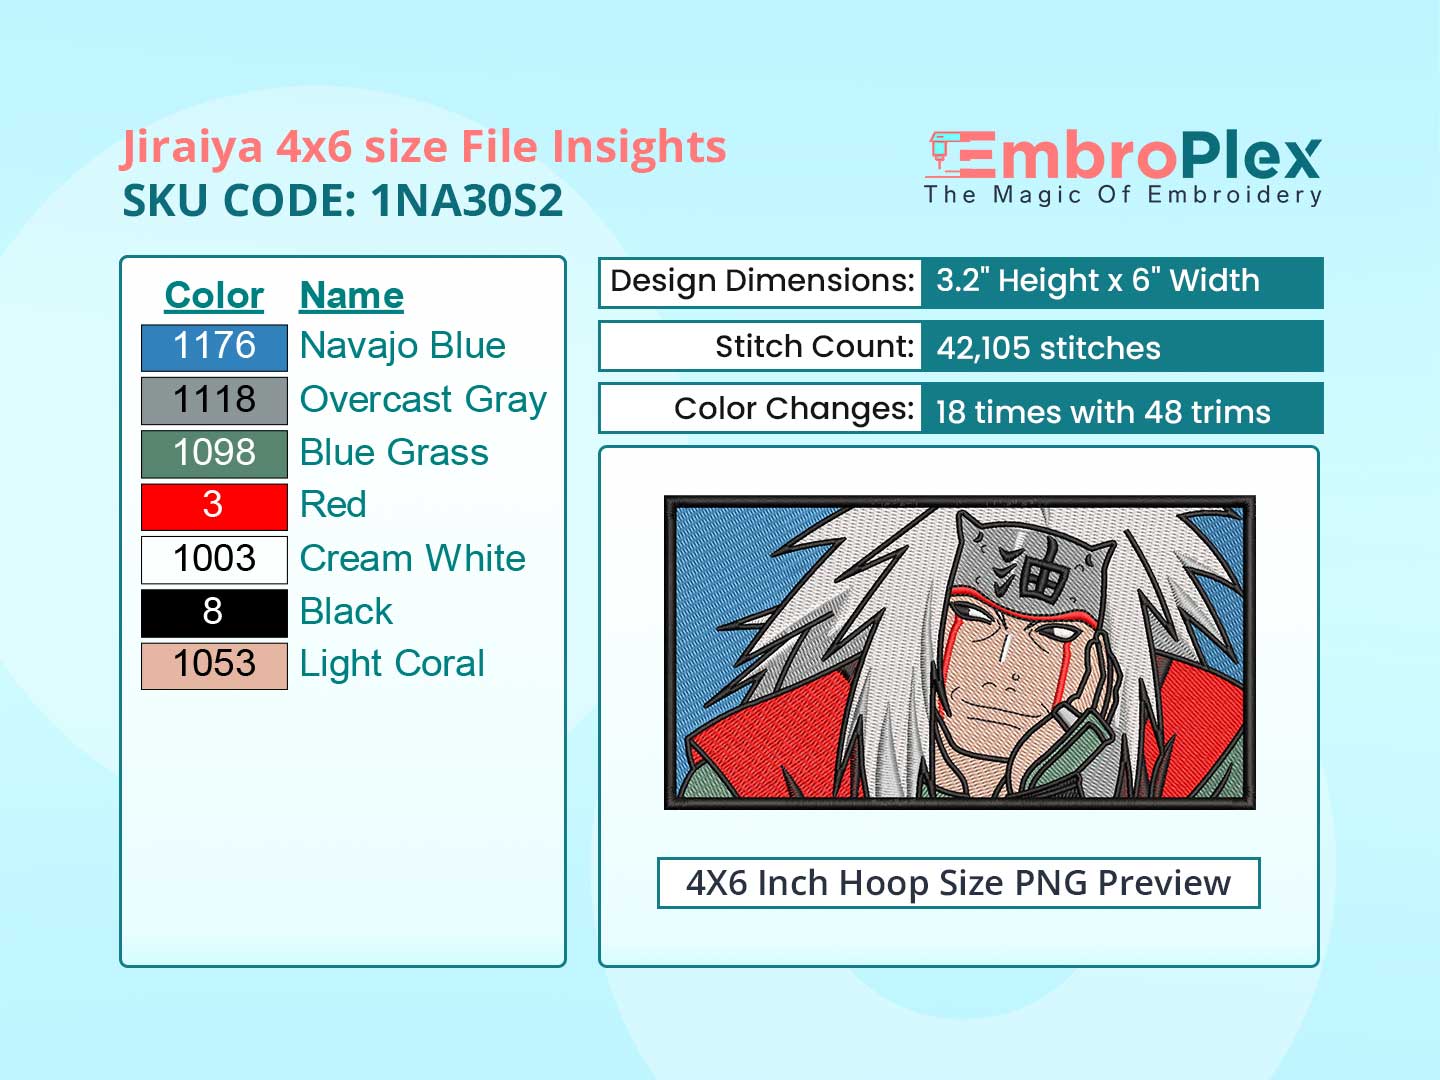 Anime-Inspired Jiraiya Embroidery Design File - 4x6 Inch hoop Size Variation overview image